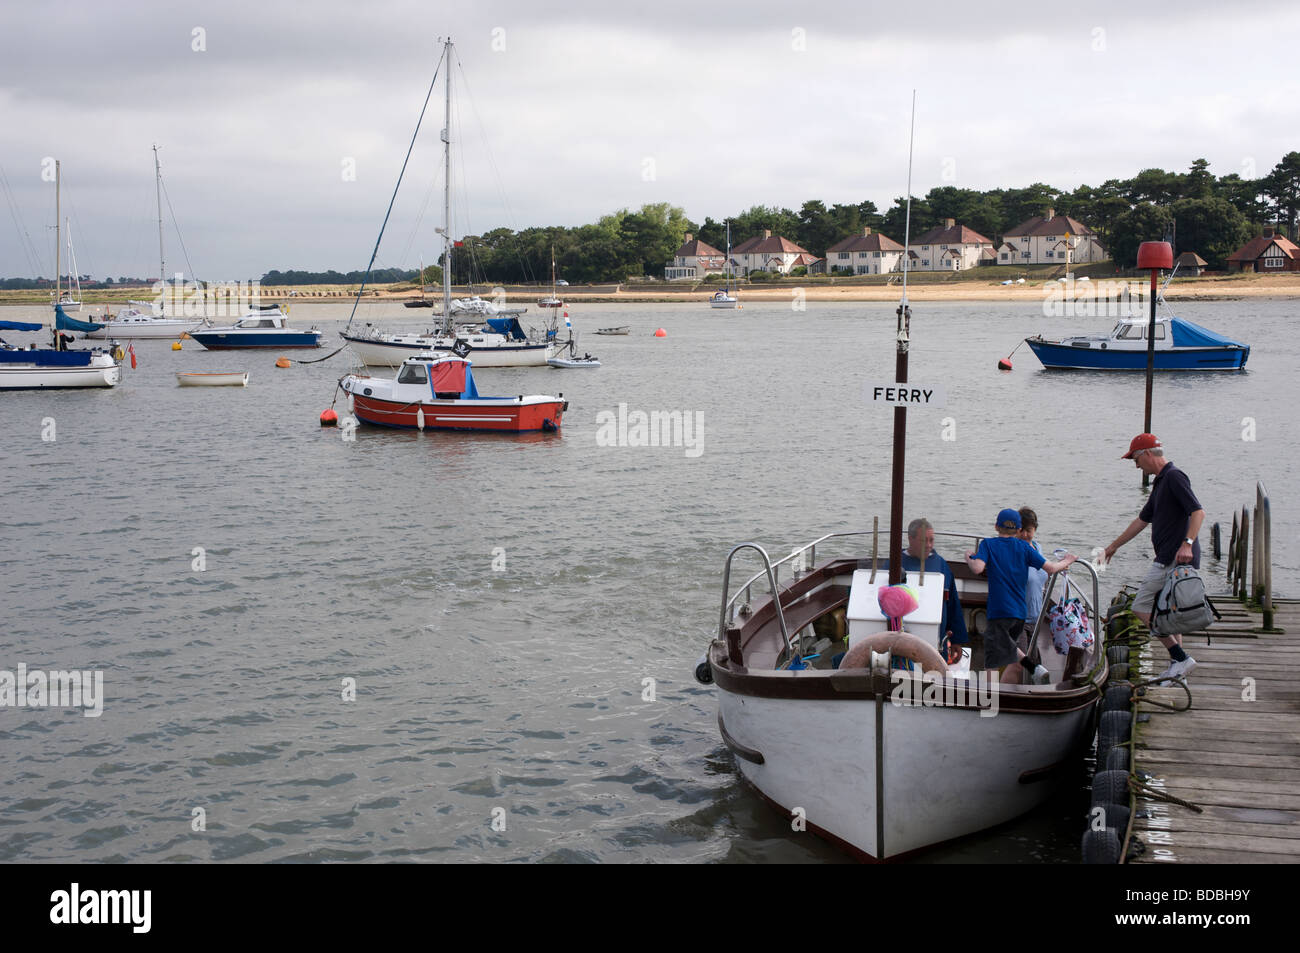 Foot passenger ferry between Felixstowe and Bawdsey Ferry on the river Deben, Suffolk, UK. Stock Photo